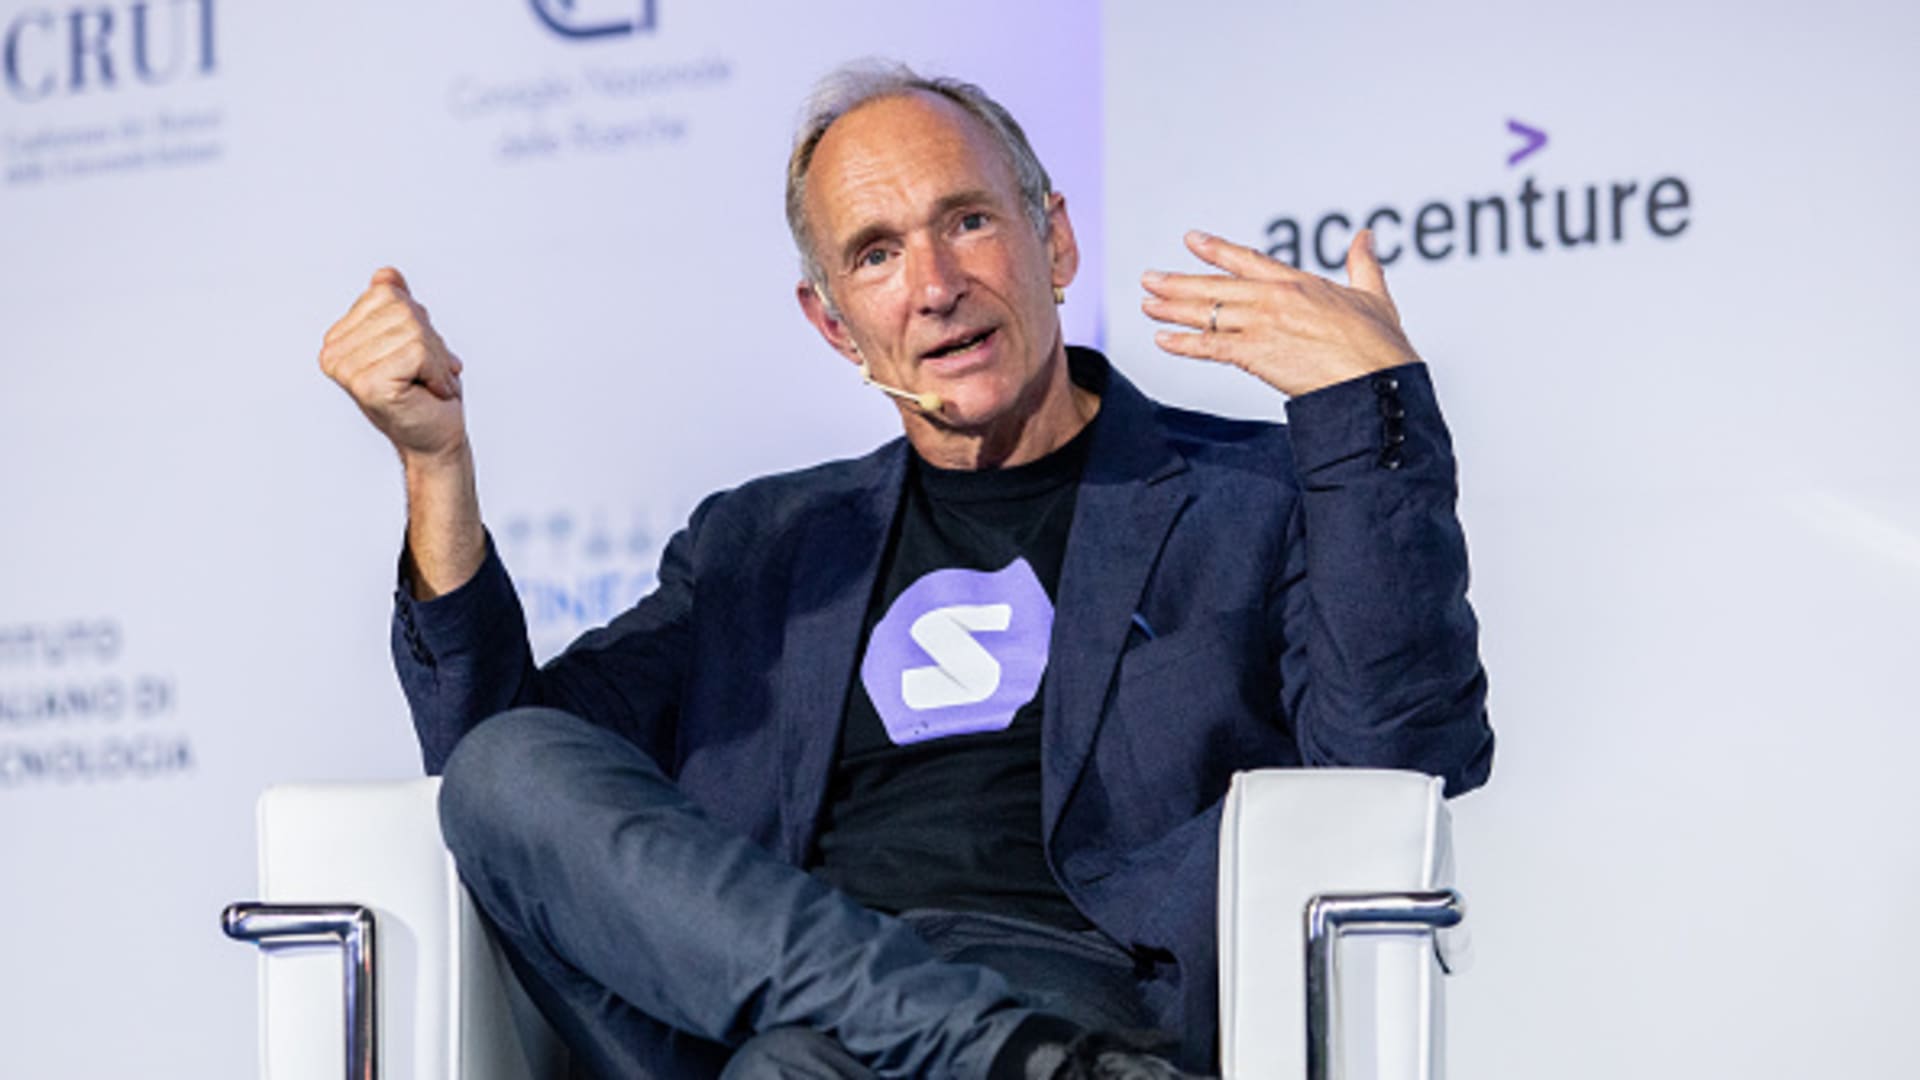 Tim Berners-Lee says 'too many young people' are excluded from web